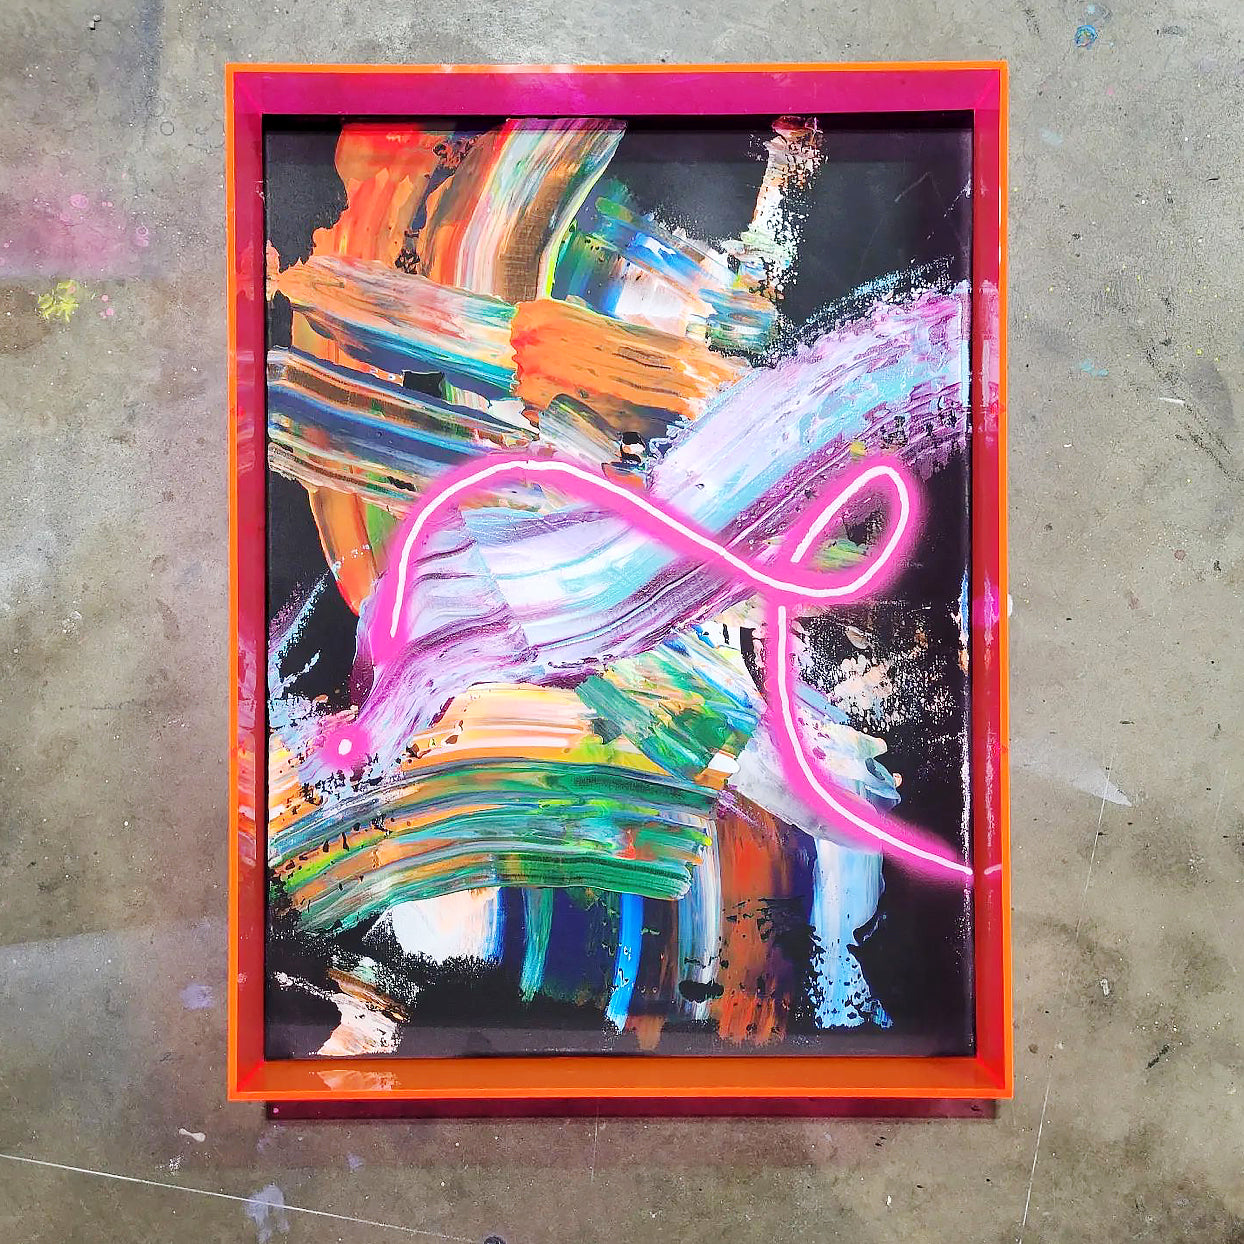 Shadowbox Lid CHOOSE Your Color 18x24x3" (Neon Pink, Orange, or Sea Glass)